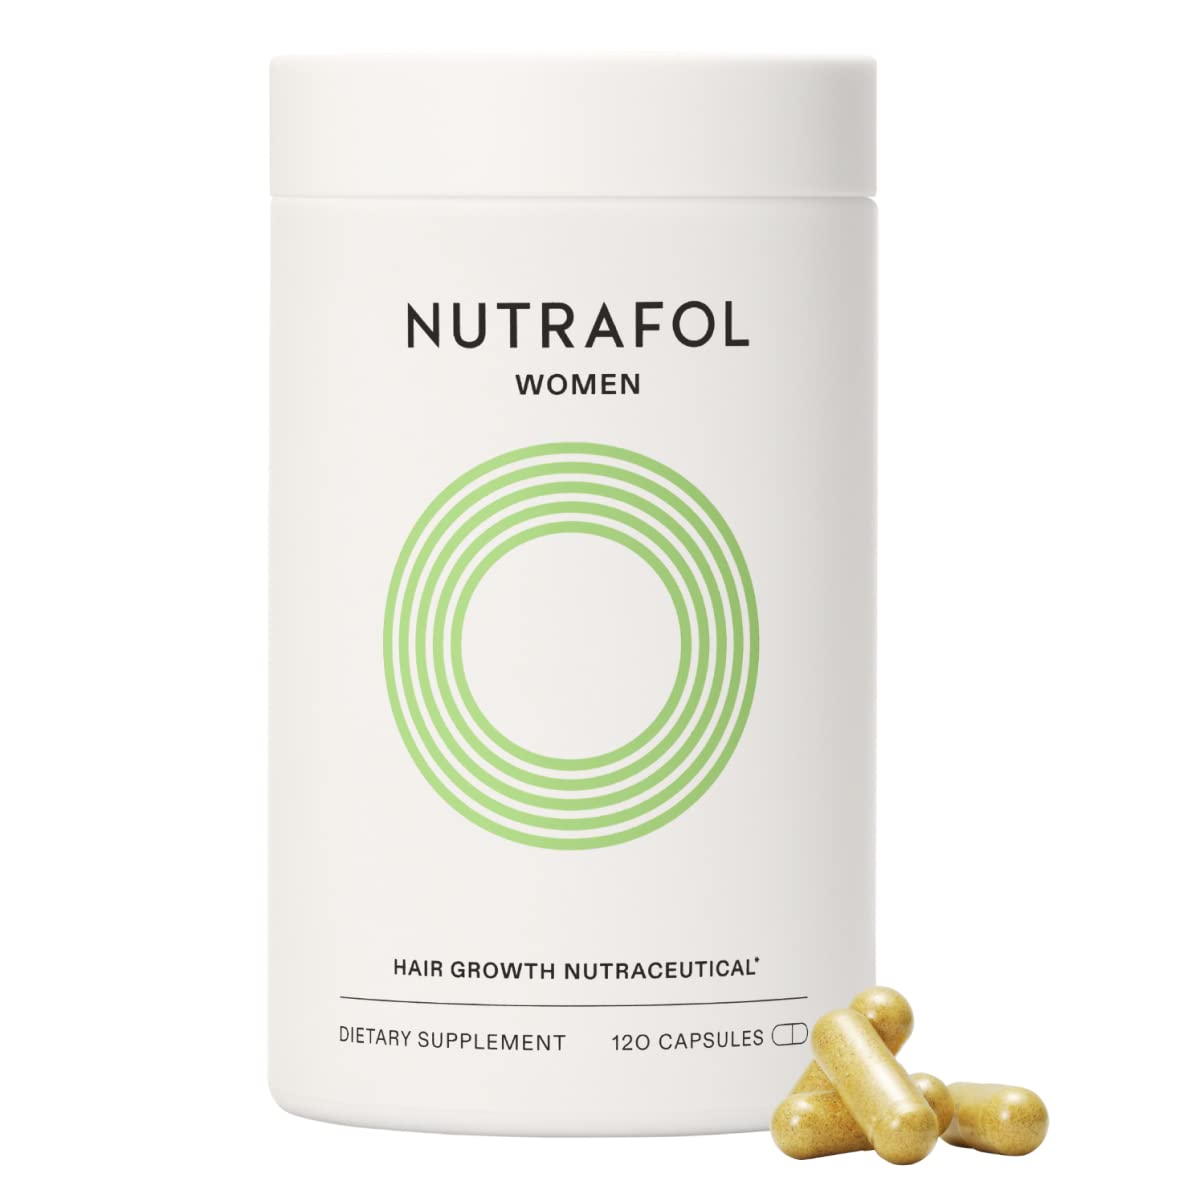 Nutrafol Womens (3-Month Pack)